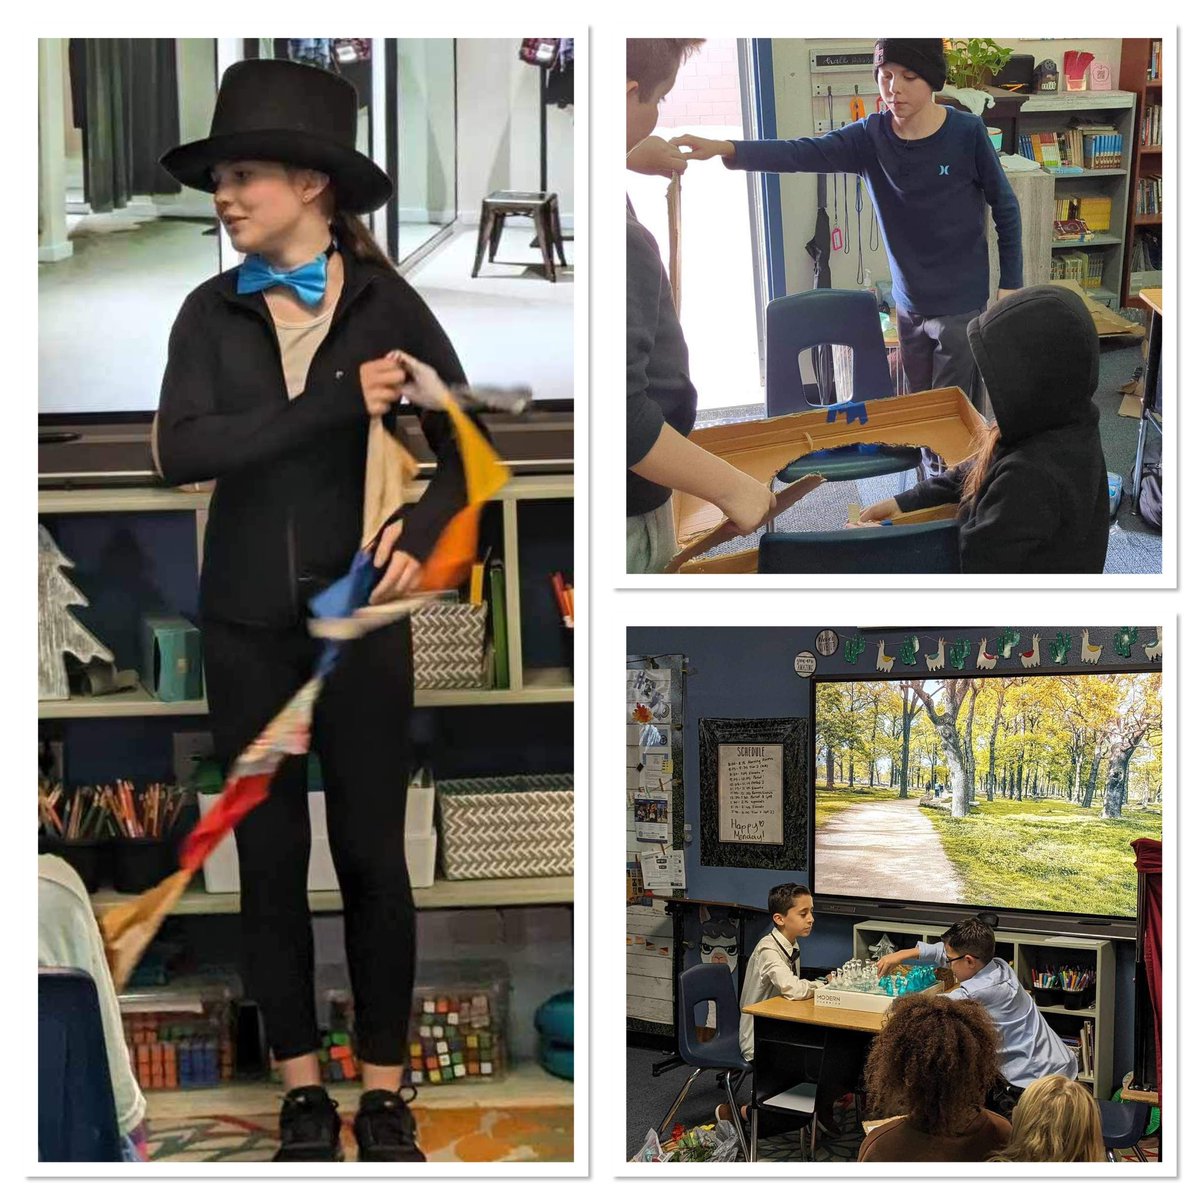 6th grade students spent this week exploring the difference between a story told through animation and told through live action. They built sets, props, and costumes to act out their Pixar shorts in front of the class! #Wearestem @DVUSD 🎭